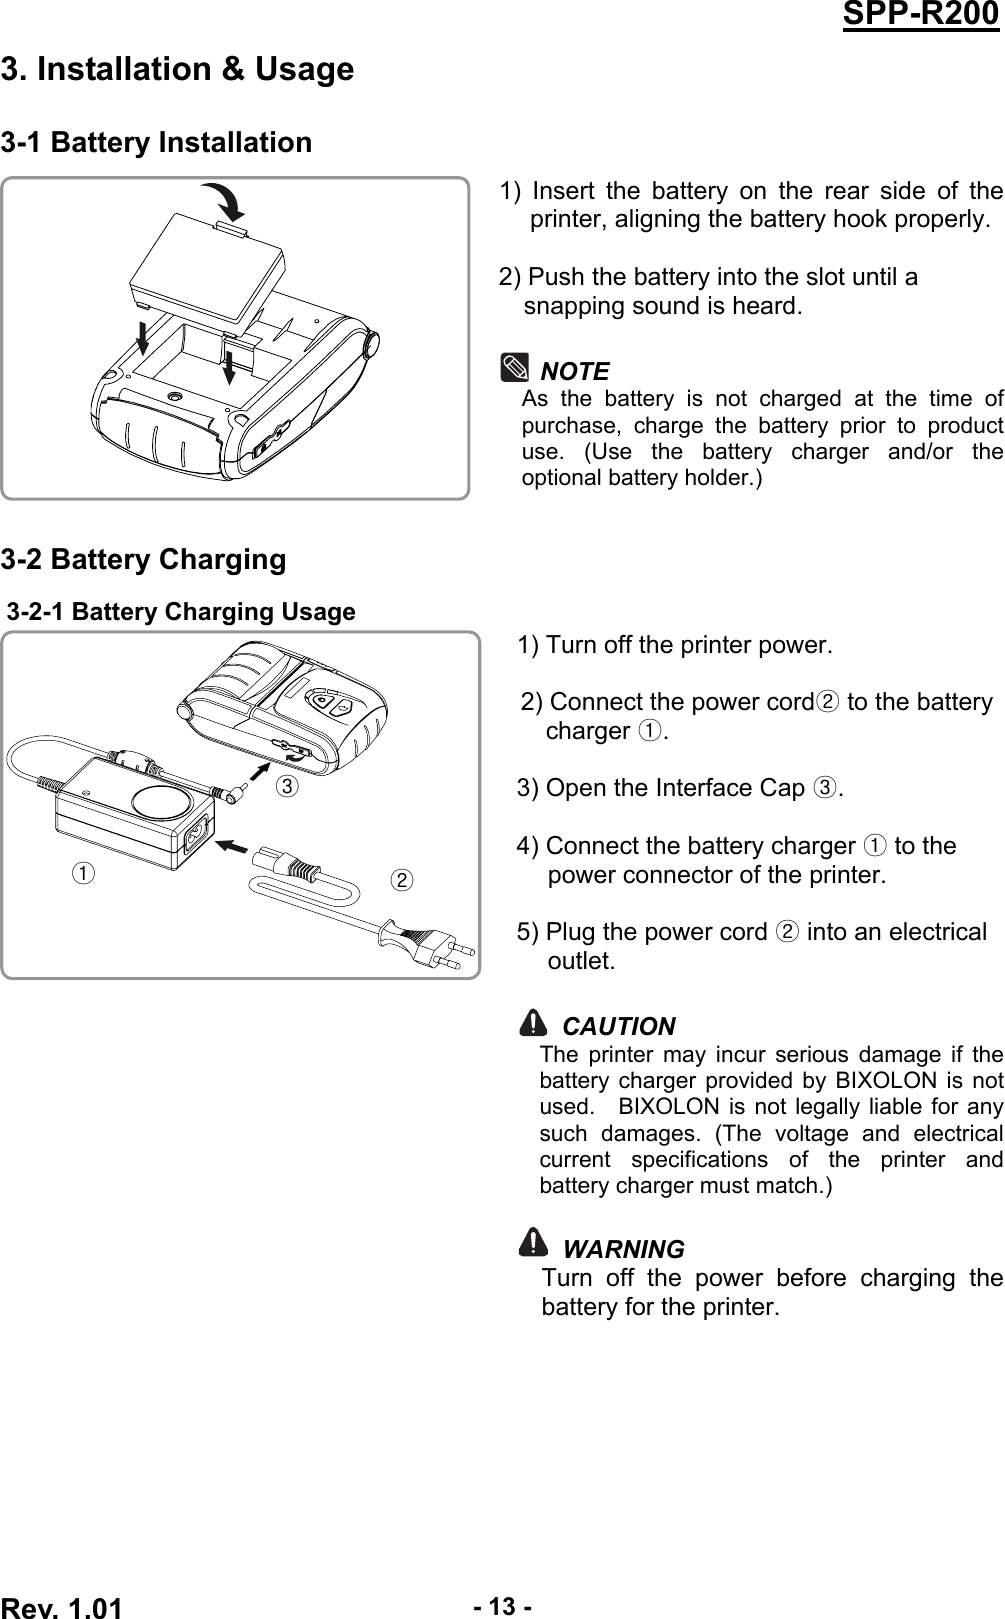  Rev. 1.01  - 13 -SPP-R2003. Installation &amp; Usage 3-1 Battery Installation 1) Insert the battery on the rear side of the printer, aligning the battery hook properly.  2) Push the battery into the slot until a   snapping sound is heard.  NOTE As the battery is not charged at the time of purchase, charge the battery prior to product use. (Use the battery charger and/or the optional battery holder.)  3-2 Battery Charging 3-2-1 Battery Charging Usage  1) Turn off the printer power.  2) Connect the power cord② to the battery charger ①.  3) Open the Interface Cap ③.  4) Connect the battery charger ① to the power connector of the printer.  5) Plug the power cord ② into an electrical outlet.  CAUTION The printer may incur serious damage if the battery charger provided by BIXOLON is not used.  BIXOLON is not legally liable for any such damages. (The voltage and electrical current specifications of the printer and battery charger must match.)   WARNING Turn off the power before charging the battery for the printer.  ① ② ③ 